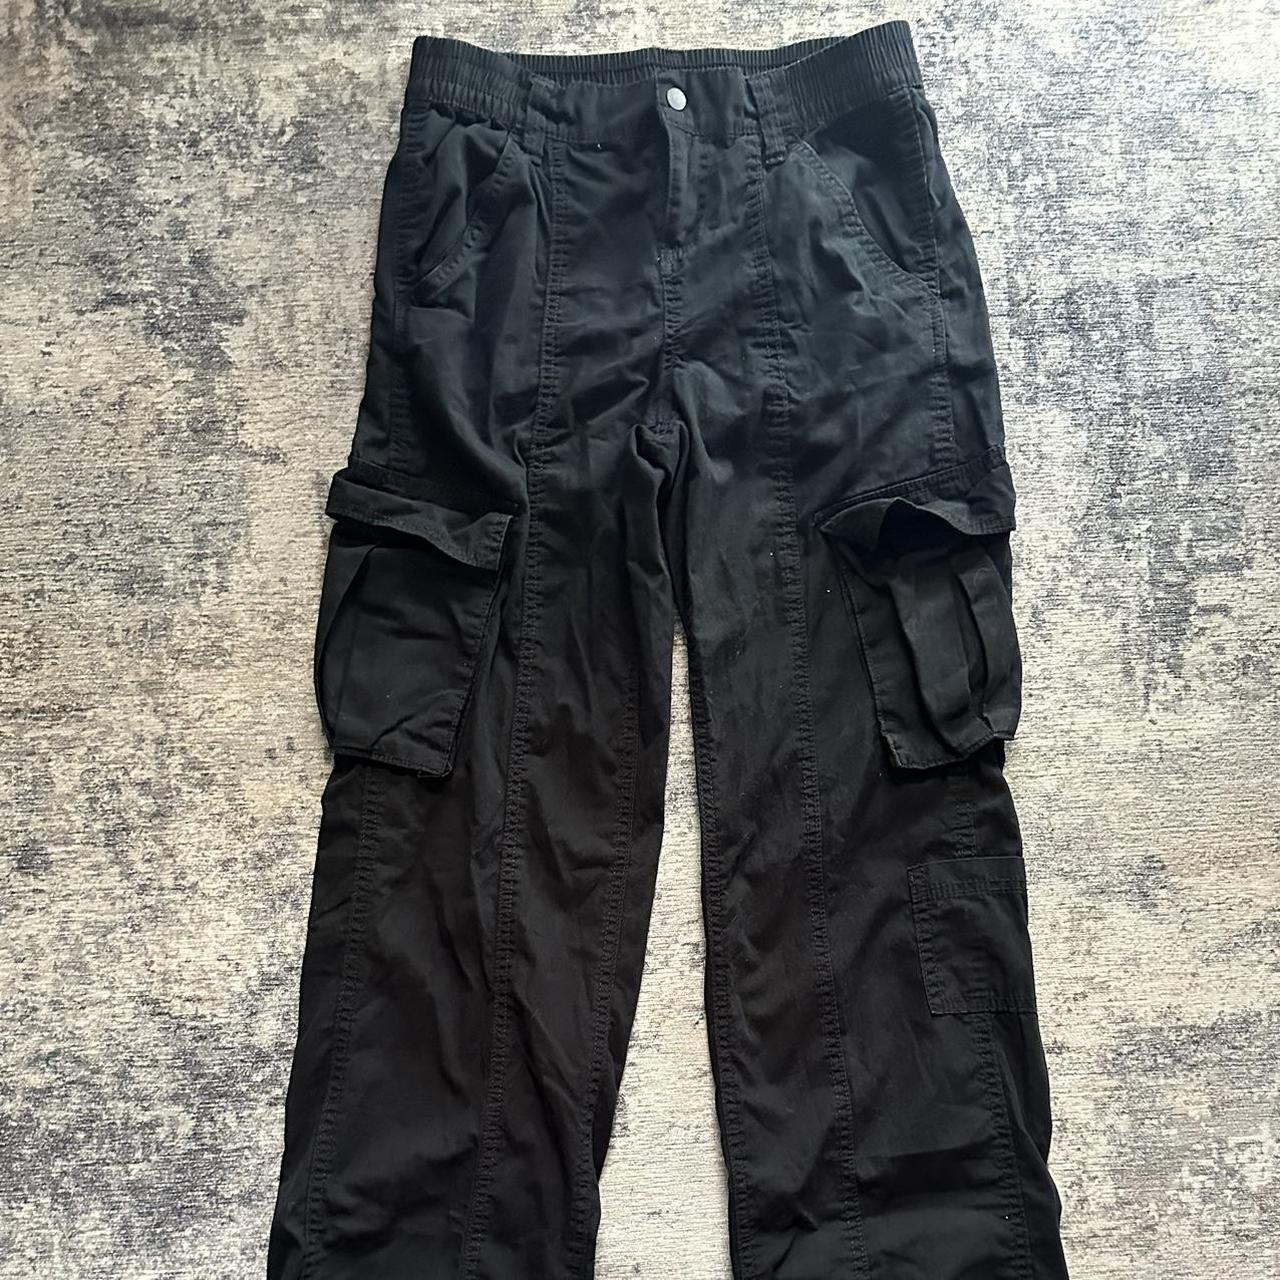 Divided H&M Cargos In excellent condition Open to... - Depop